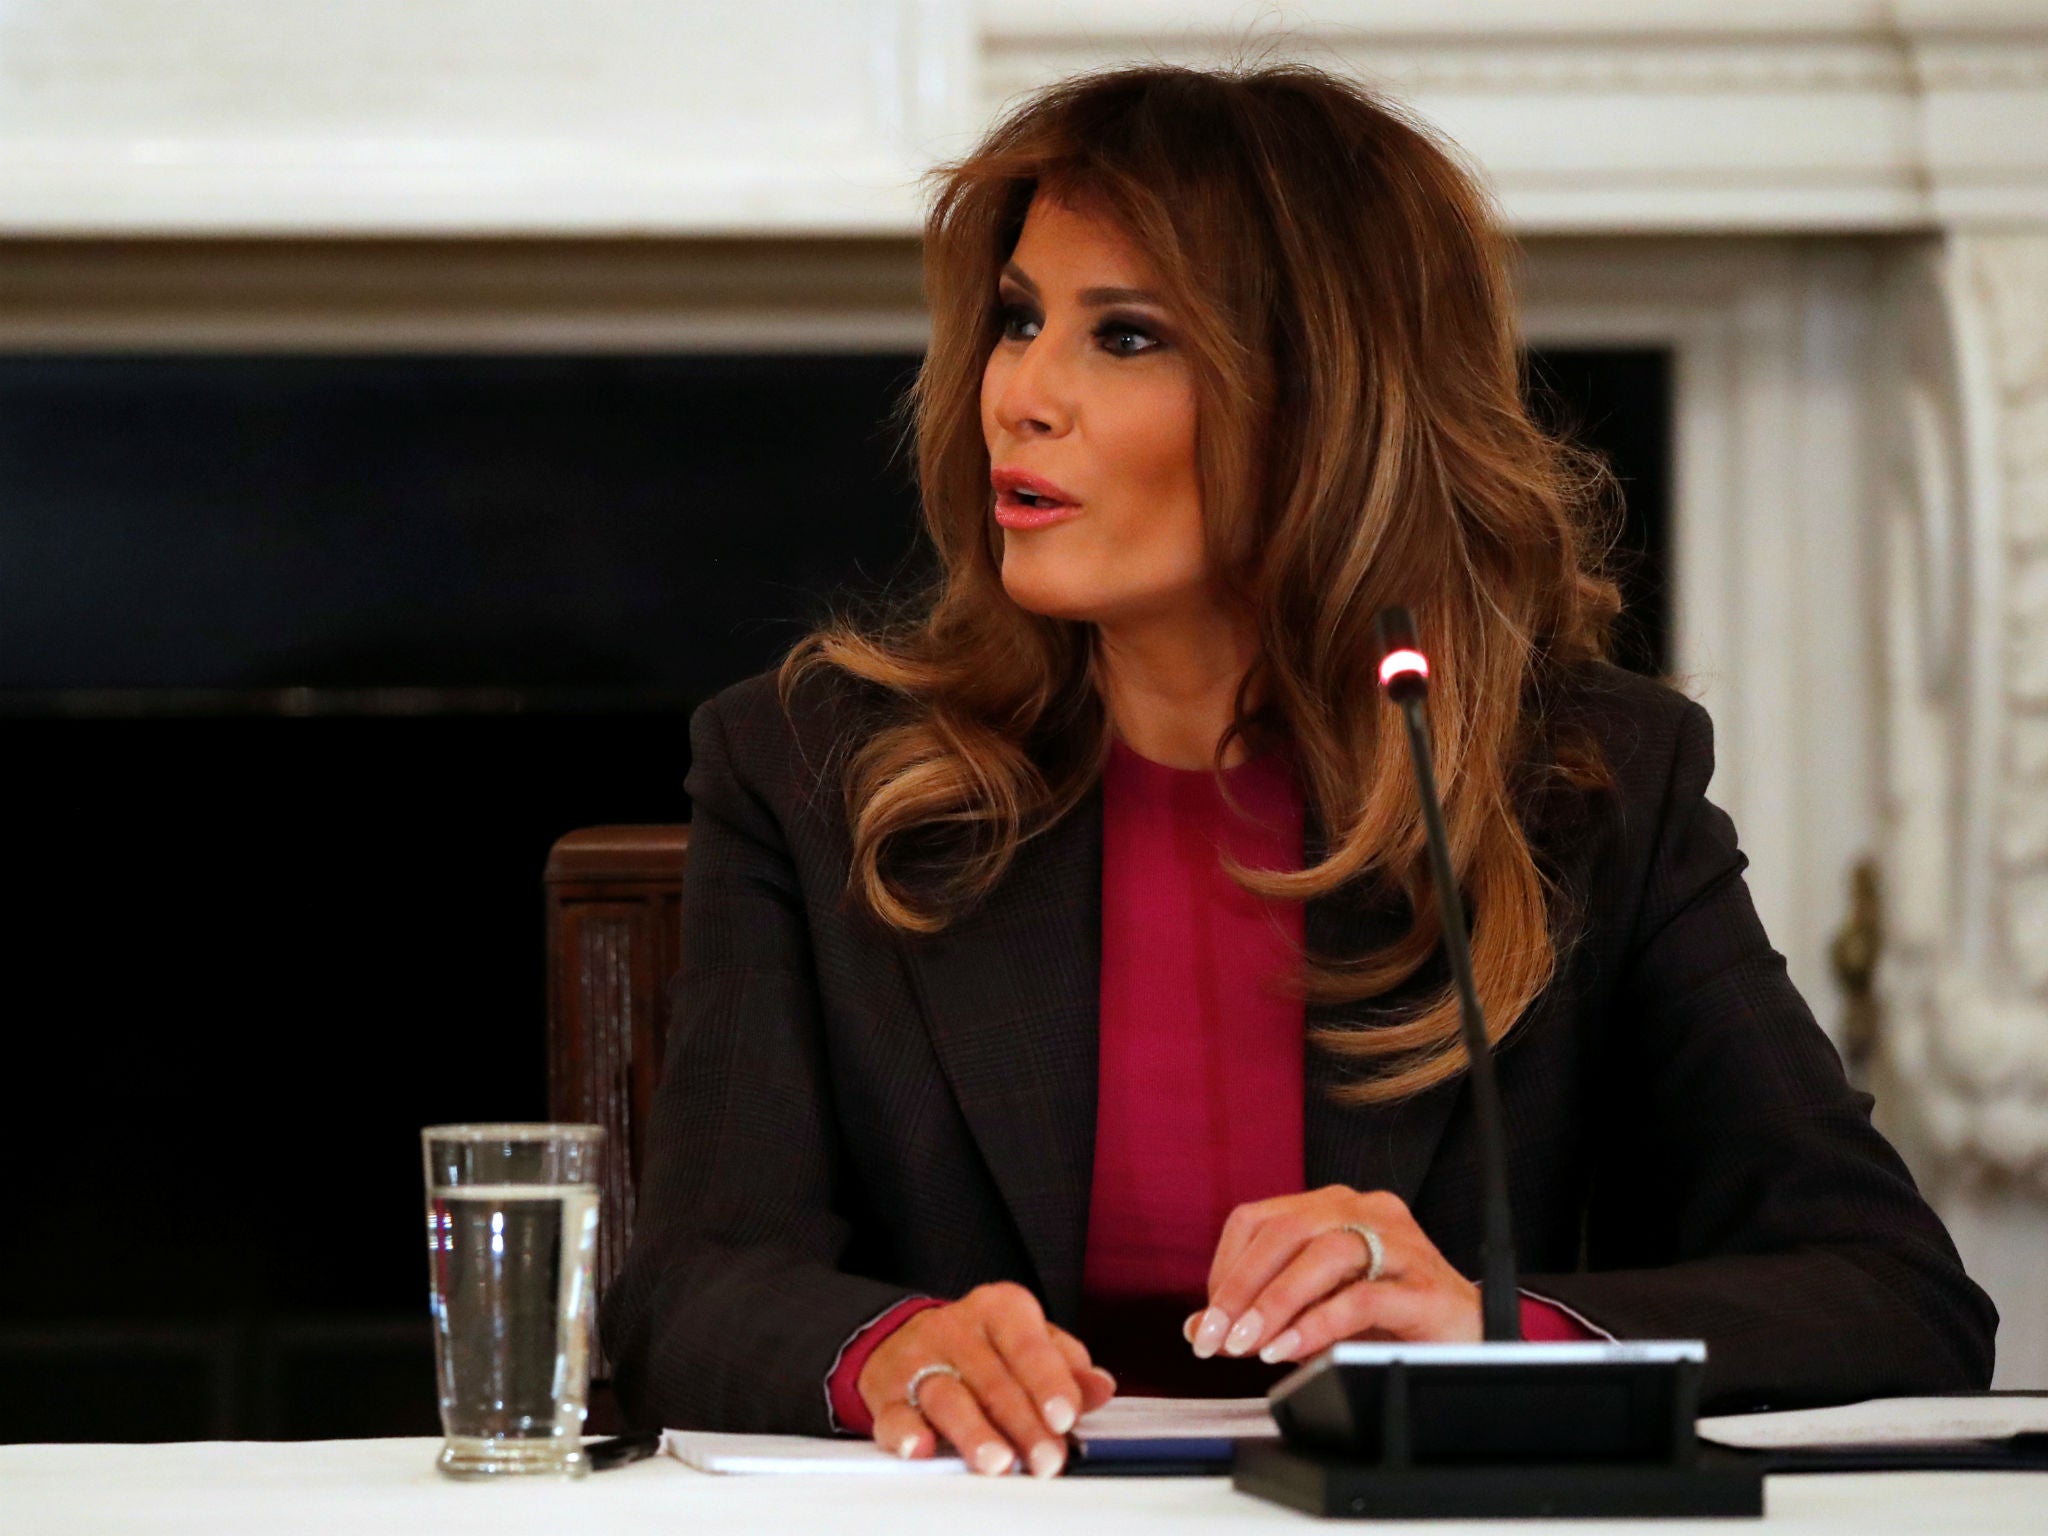 Melania Trump hosts a roundtable discussion with tech leaders on the effects of the Internet on children